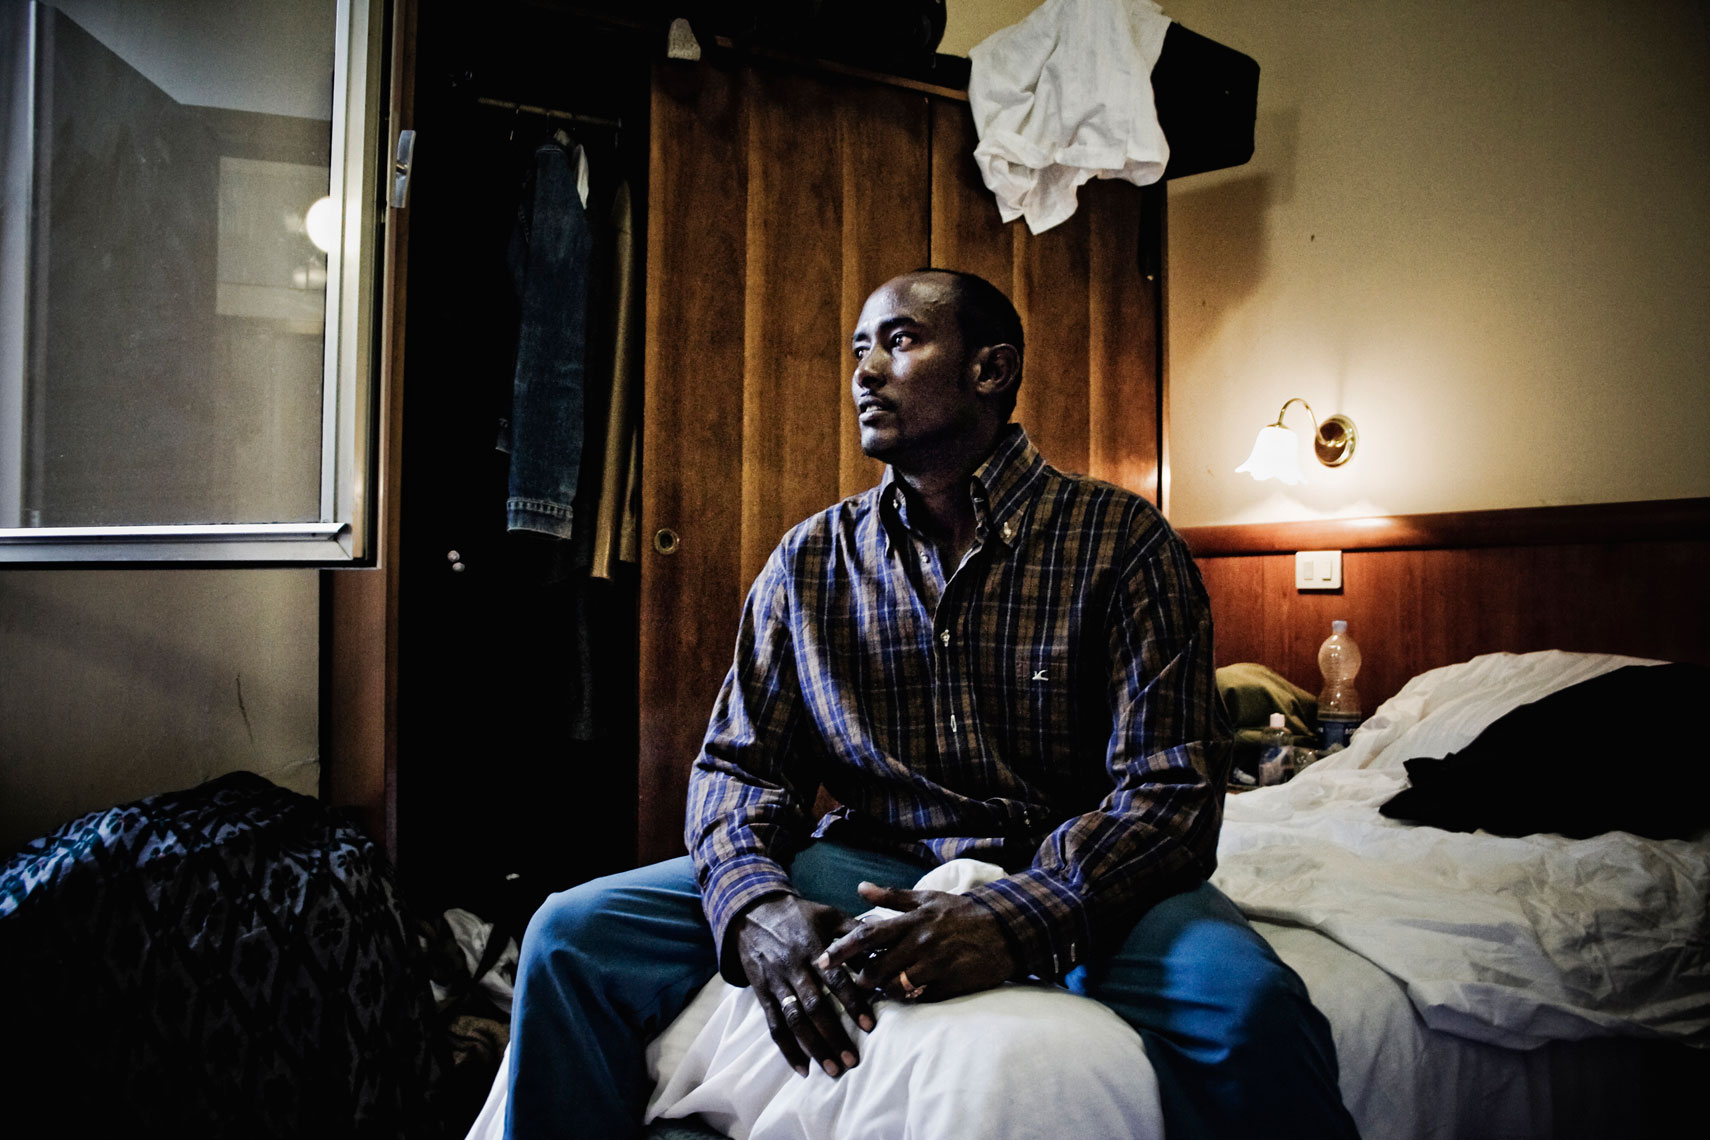 ITALY. Florence, 2nd July 2010. A Somali refugee sits inside his room in a shelter for refugees located in the building of the former "Hotel Real" in the outskirts of the city.